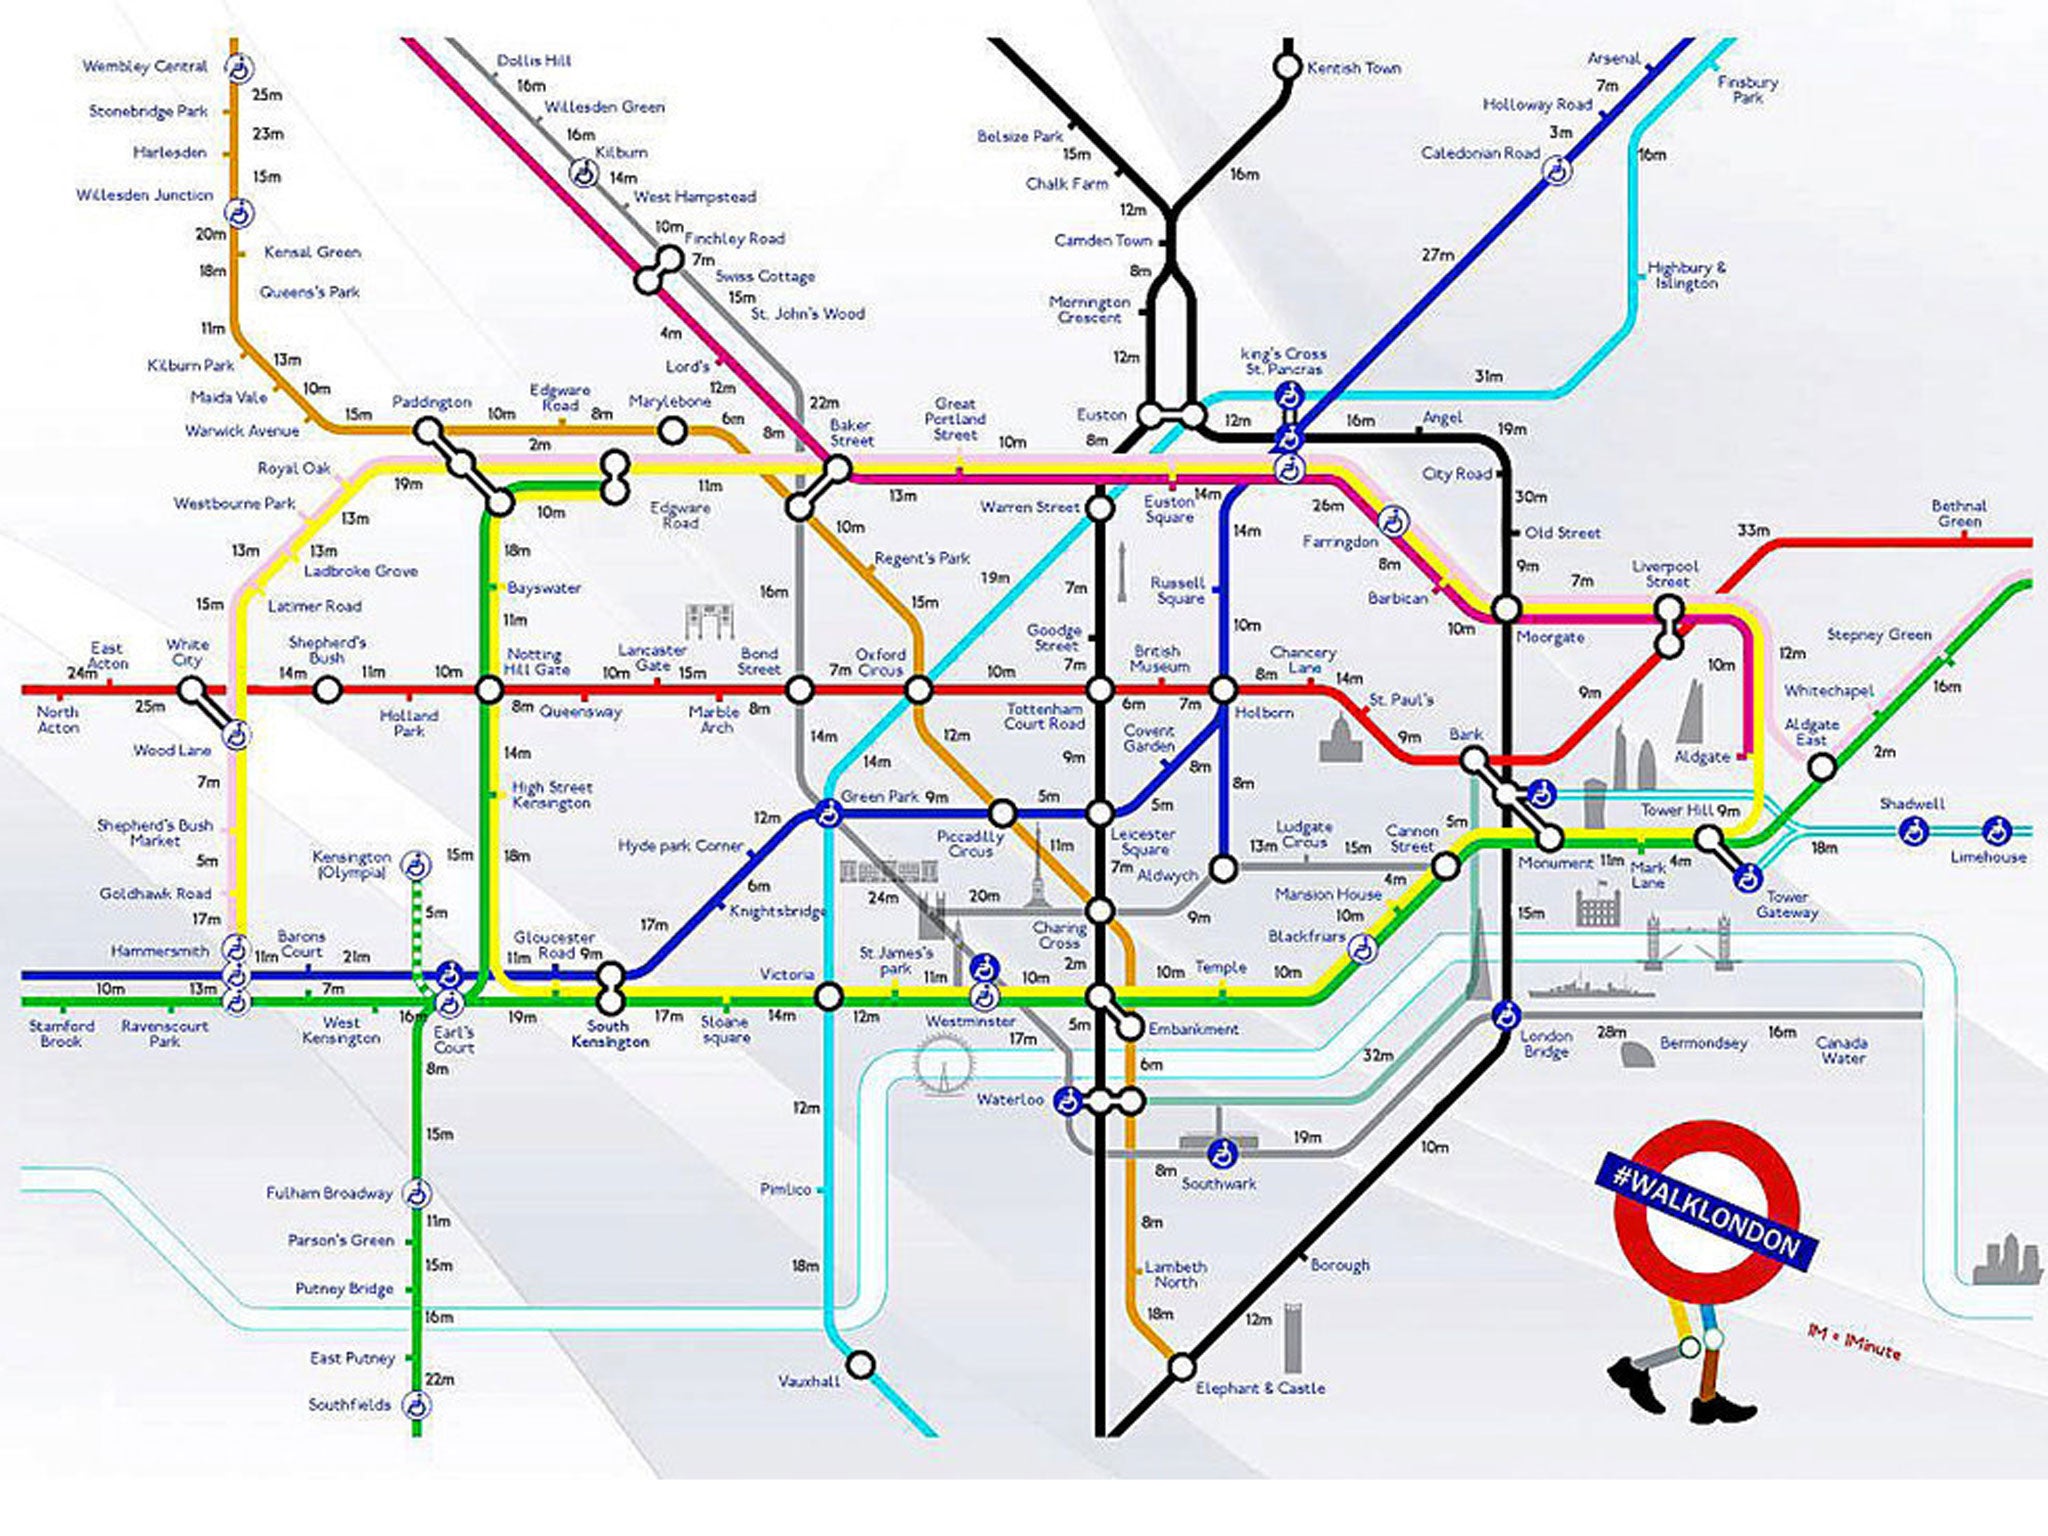 Tube strike walking map: Avoid Underground chaos with this useful guide ...